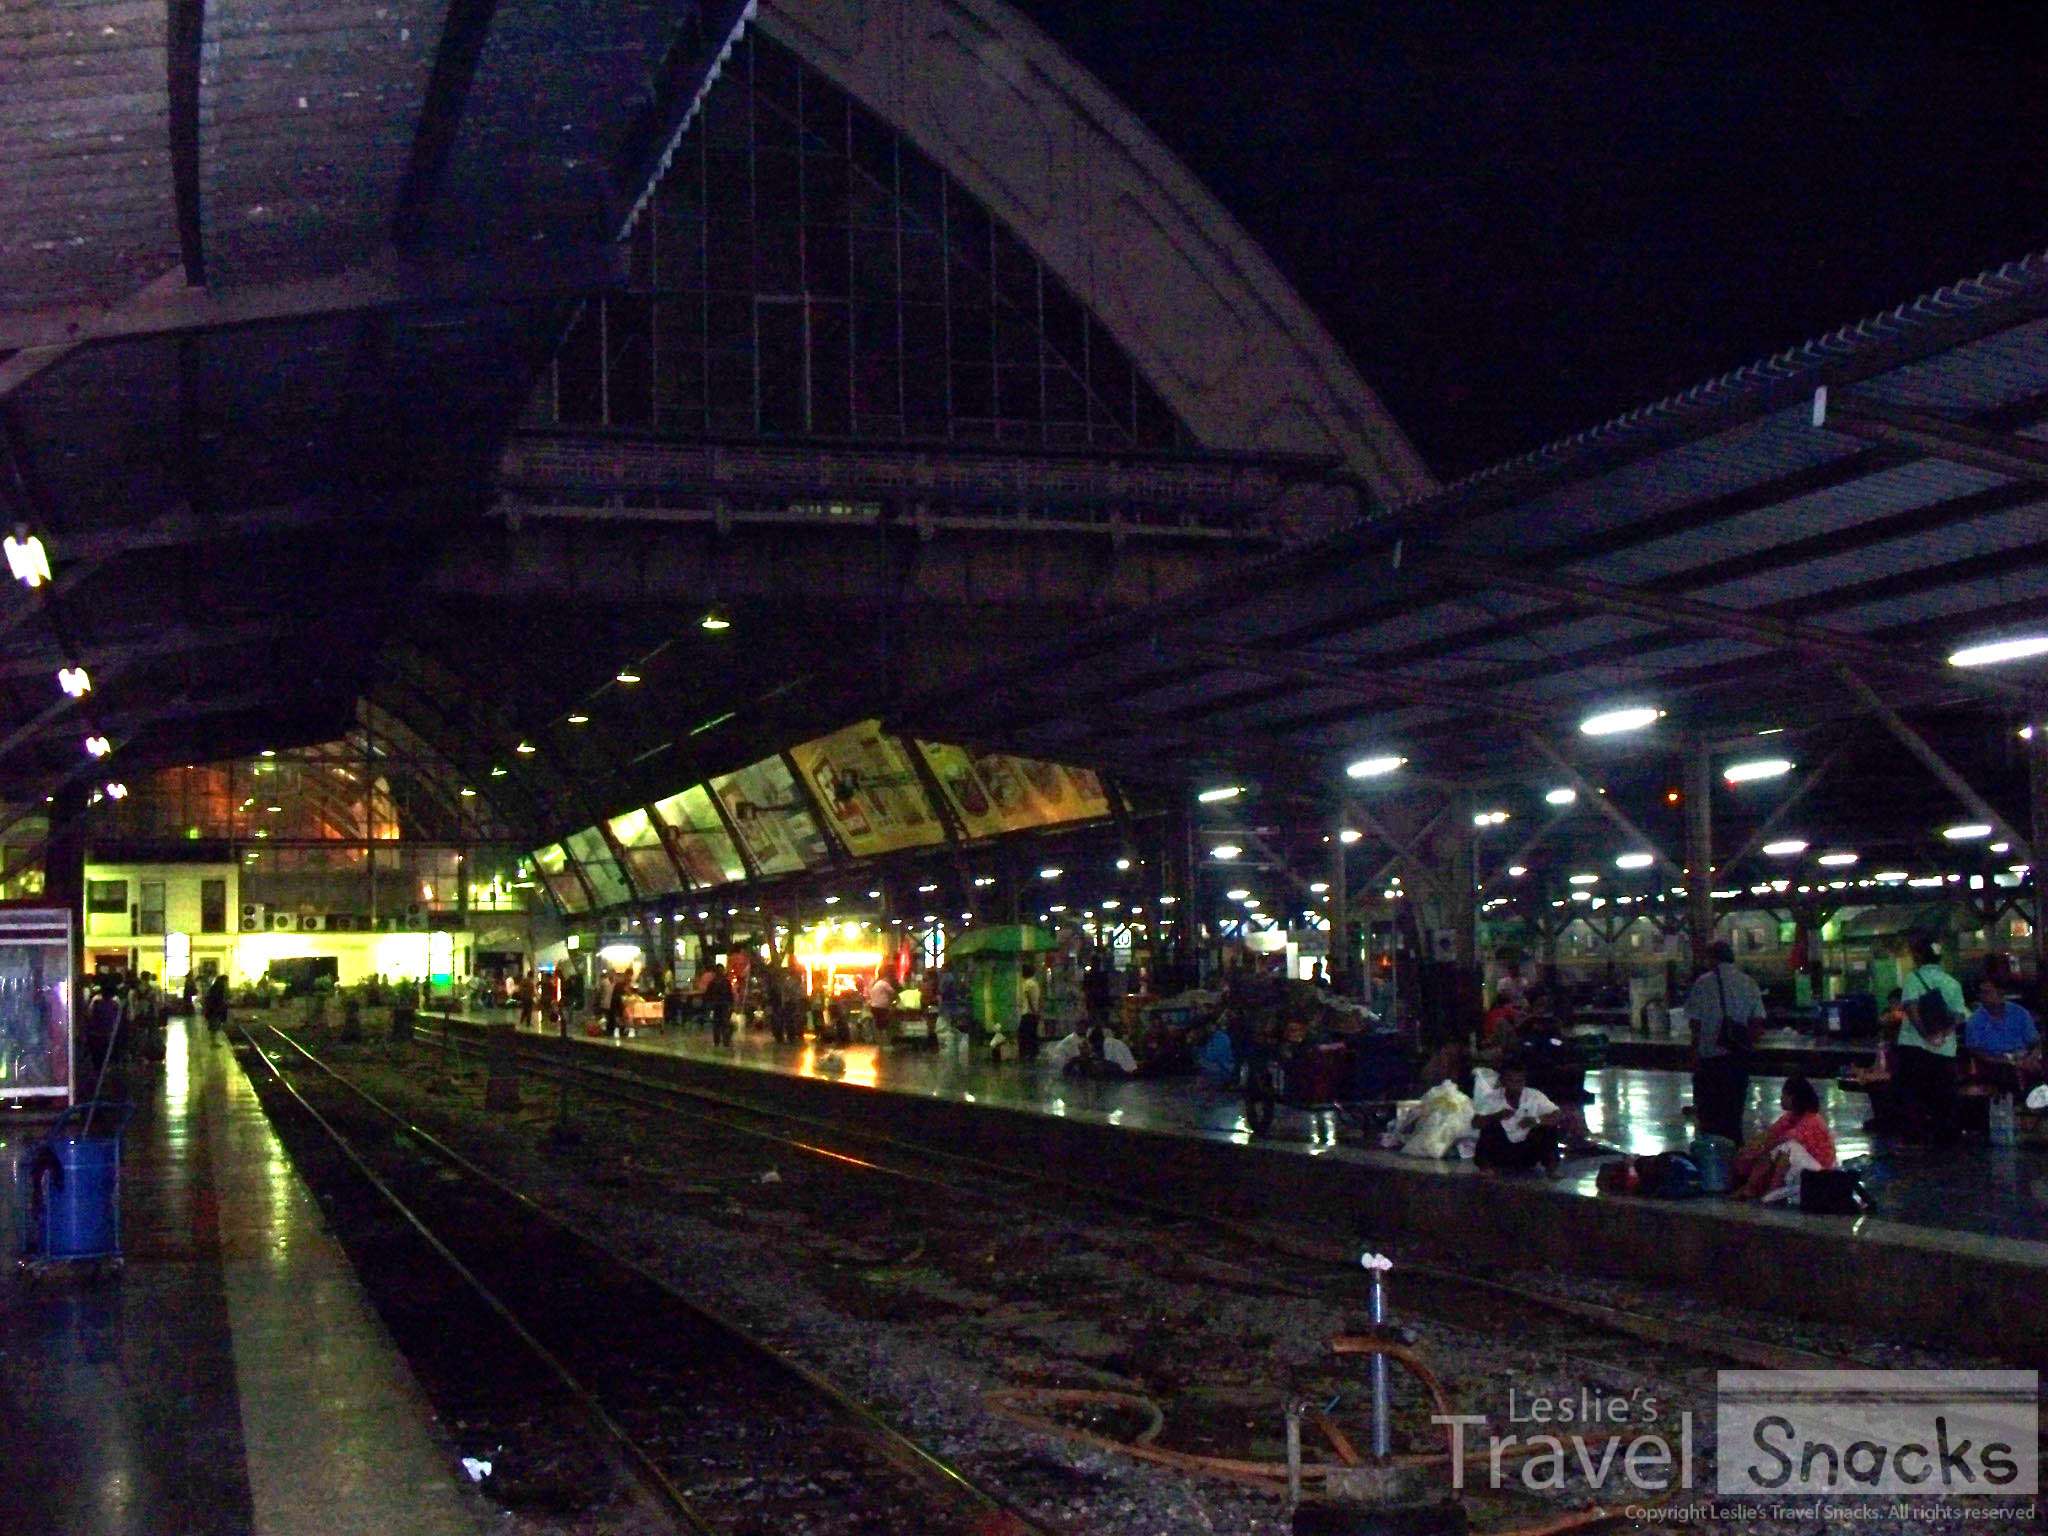 Our last photo in Thailand. We seems to spend a lot of time at this train station. 